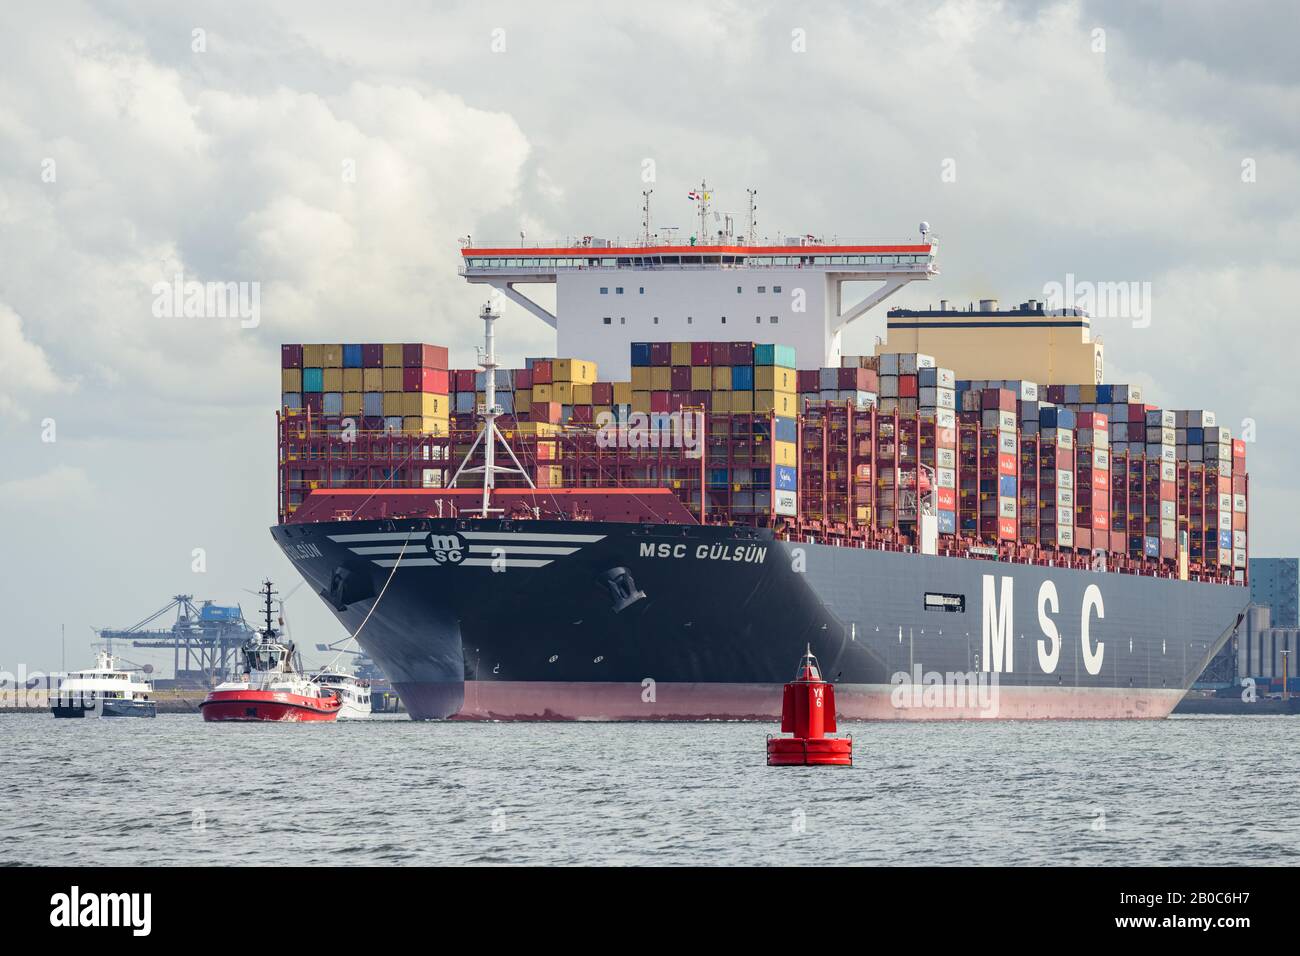 ROTTERDAM, THE NETHERLANDS - SEPTEMBER 3, 2019: The world's largest container ship, the MSC Gulsun, arrives at the Port of Rotterdam making its maiden Stock Photo